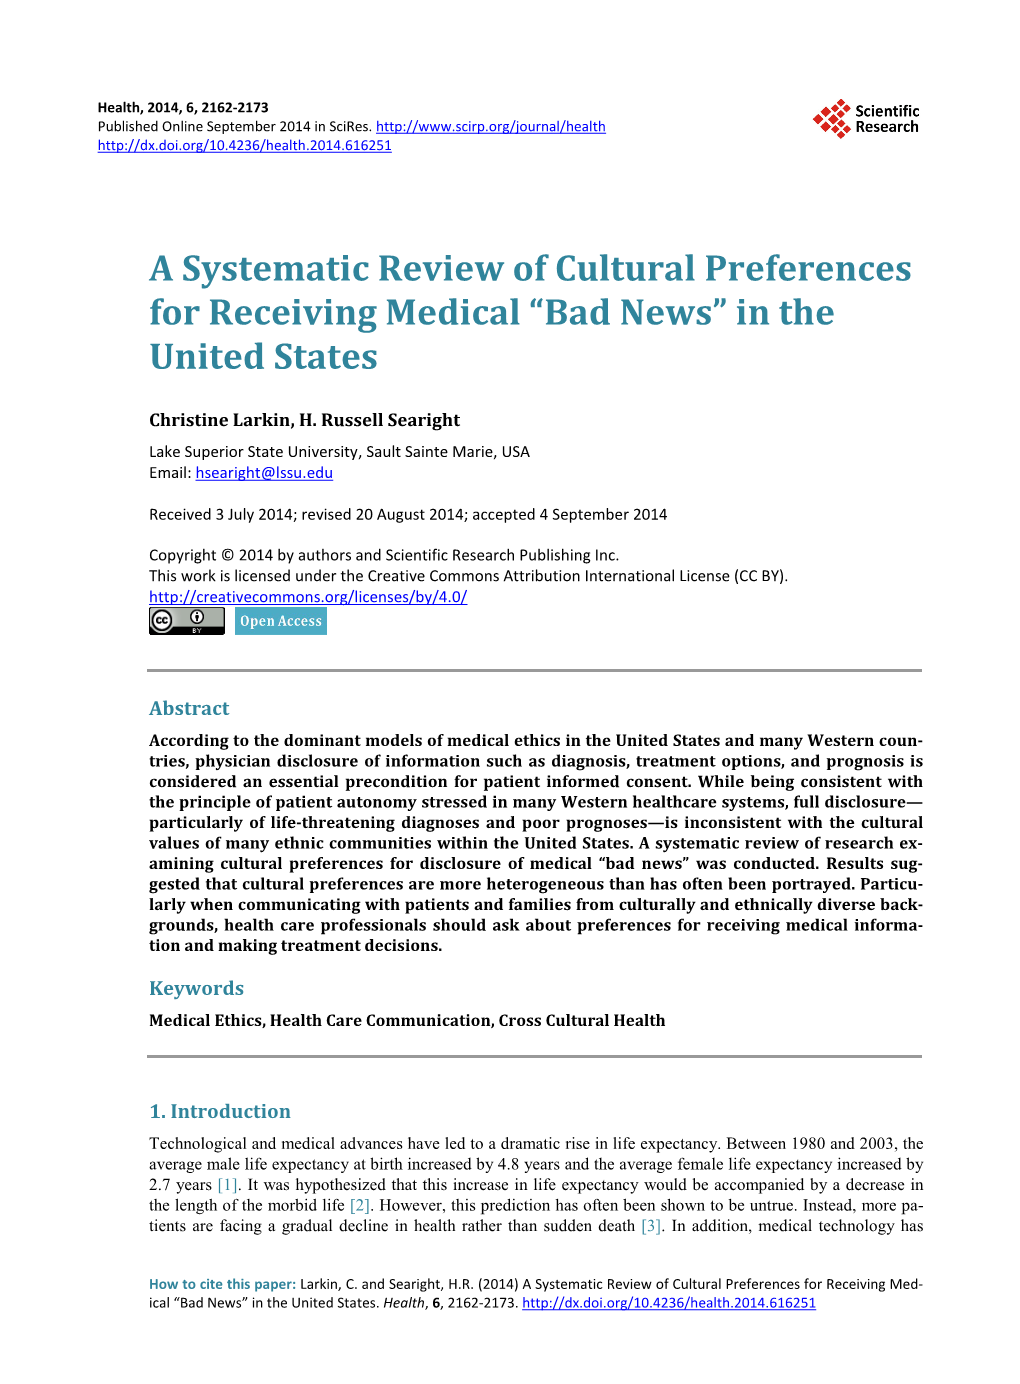 A Systematic Review of Cultural Preferences for Receiving Medical “Bad News” in the United States